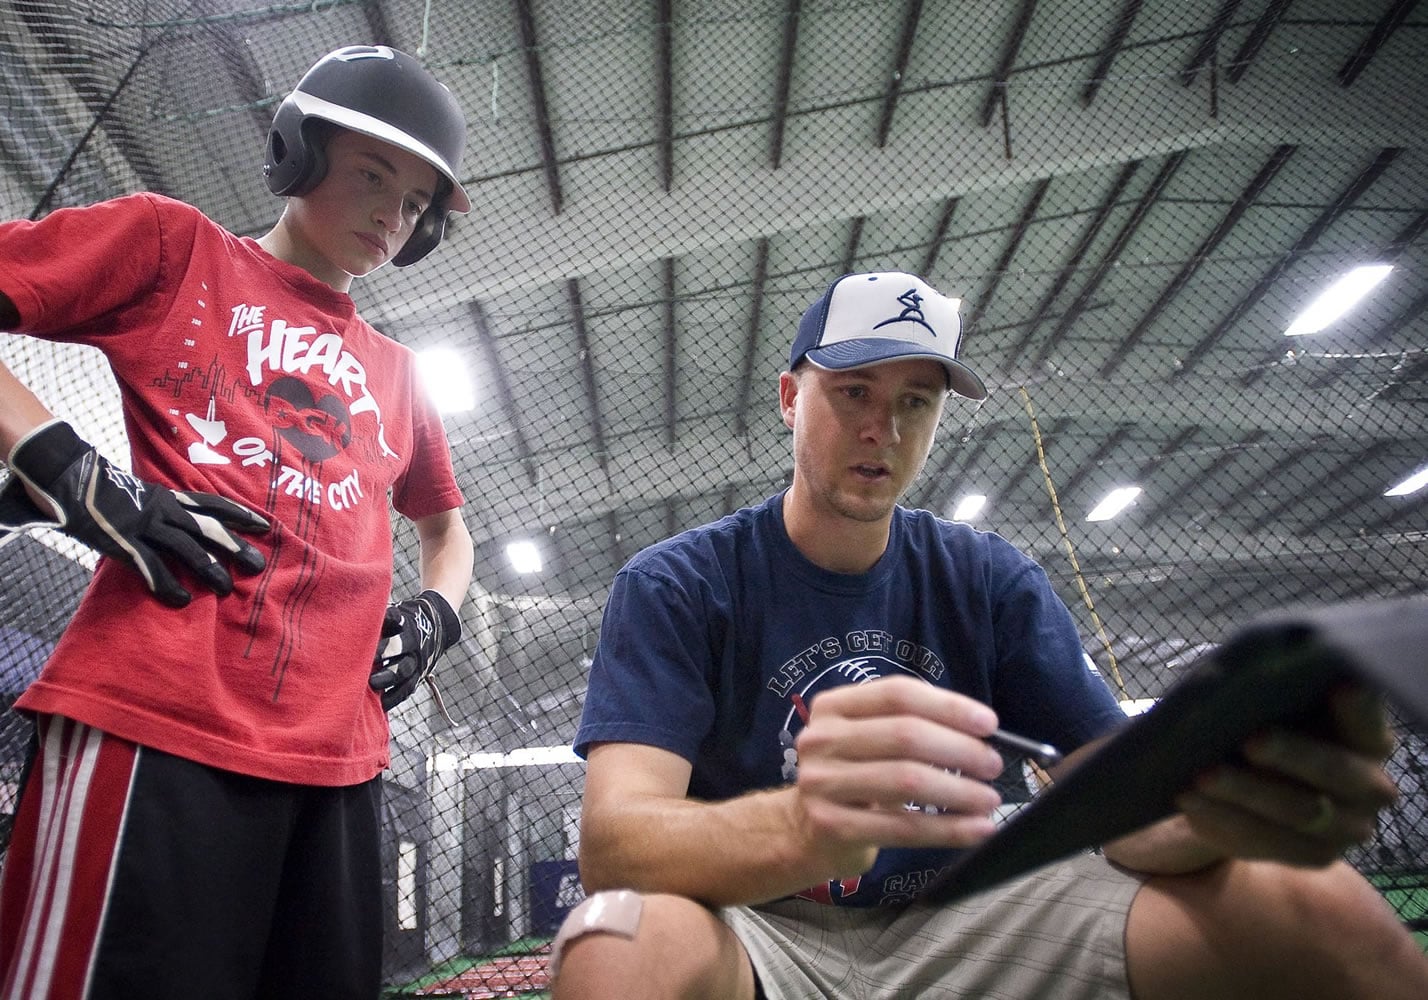 Chris Gissell, co-owner of Extra Innings in east Vancouver, evaluates a one-on-one hitting lesson with Max Hopkins, 14.